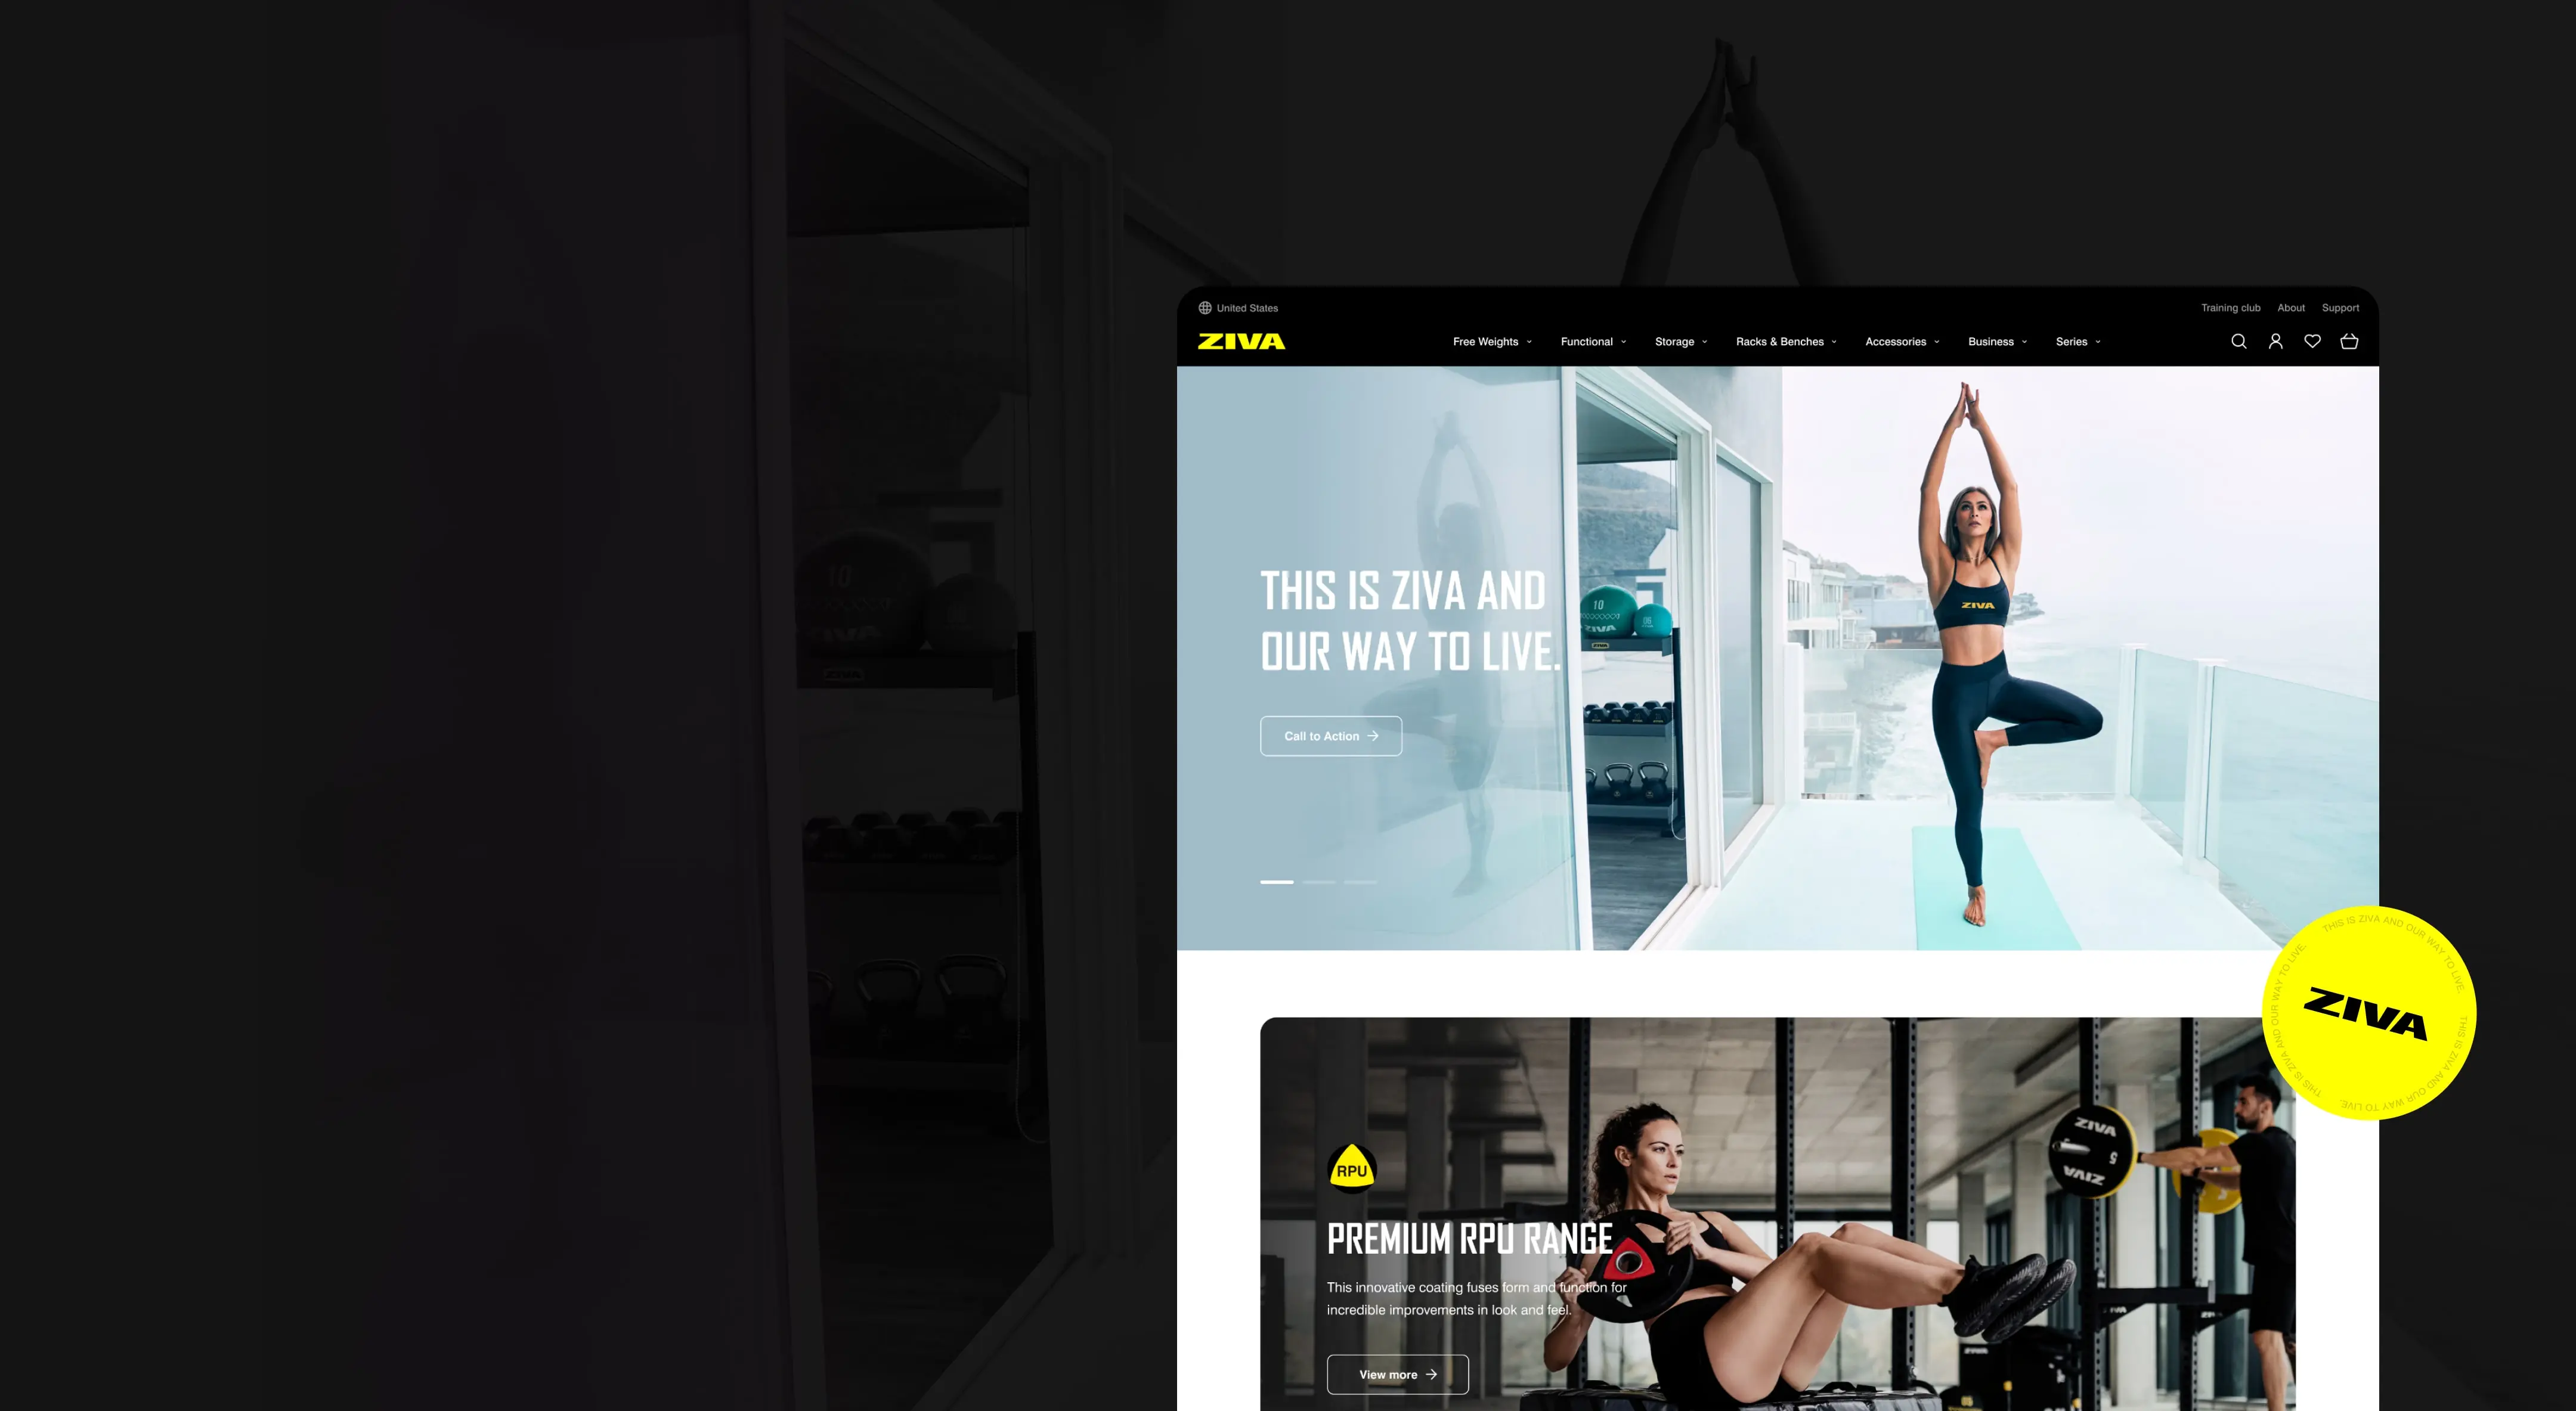 A global e-commerce website for Ziva by Digital Creative, case study cover image